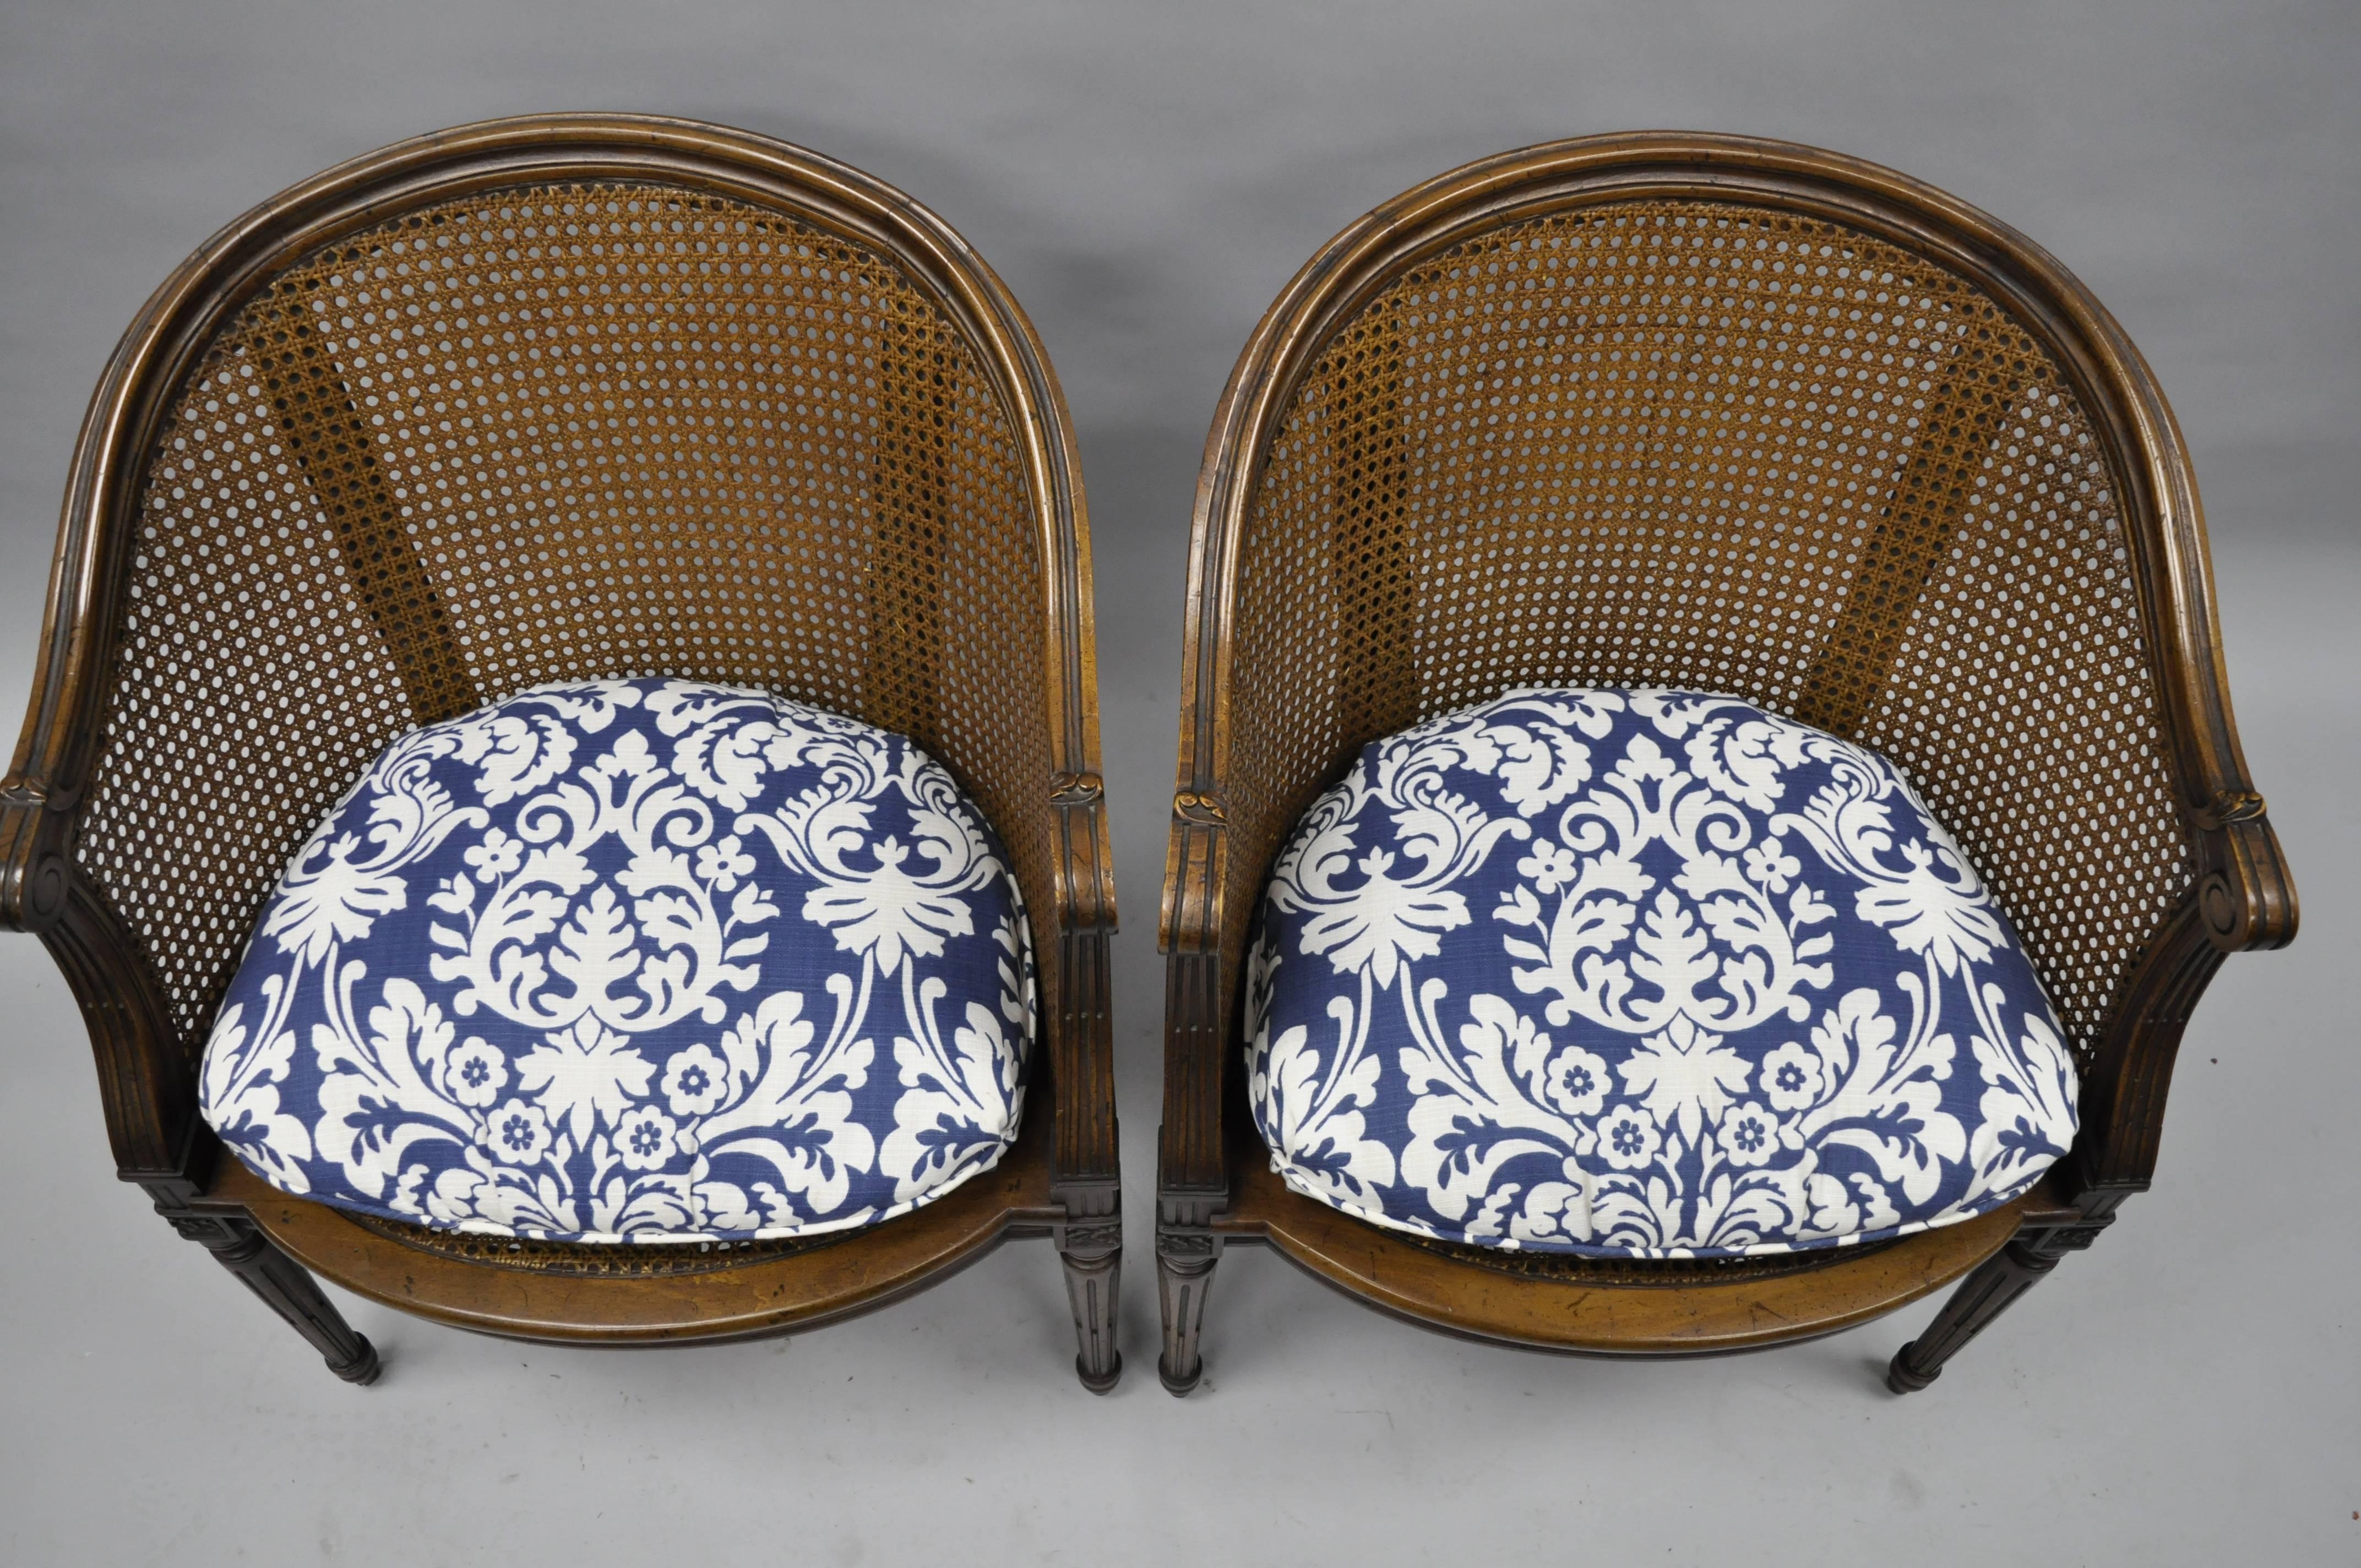 Mid-20th Century Pair of French Louis XVI Style Walnut and Cane Barrel Back Chairs by Heritage